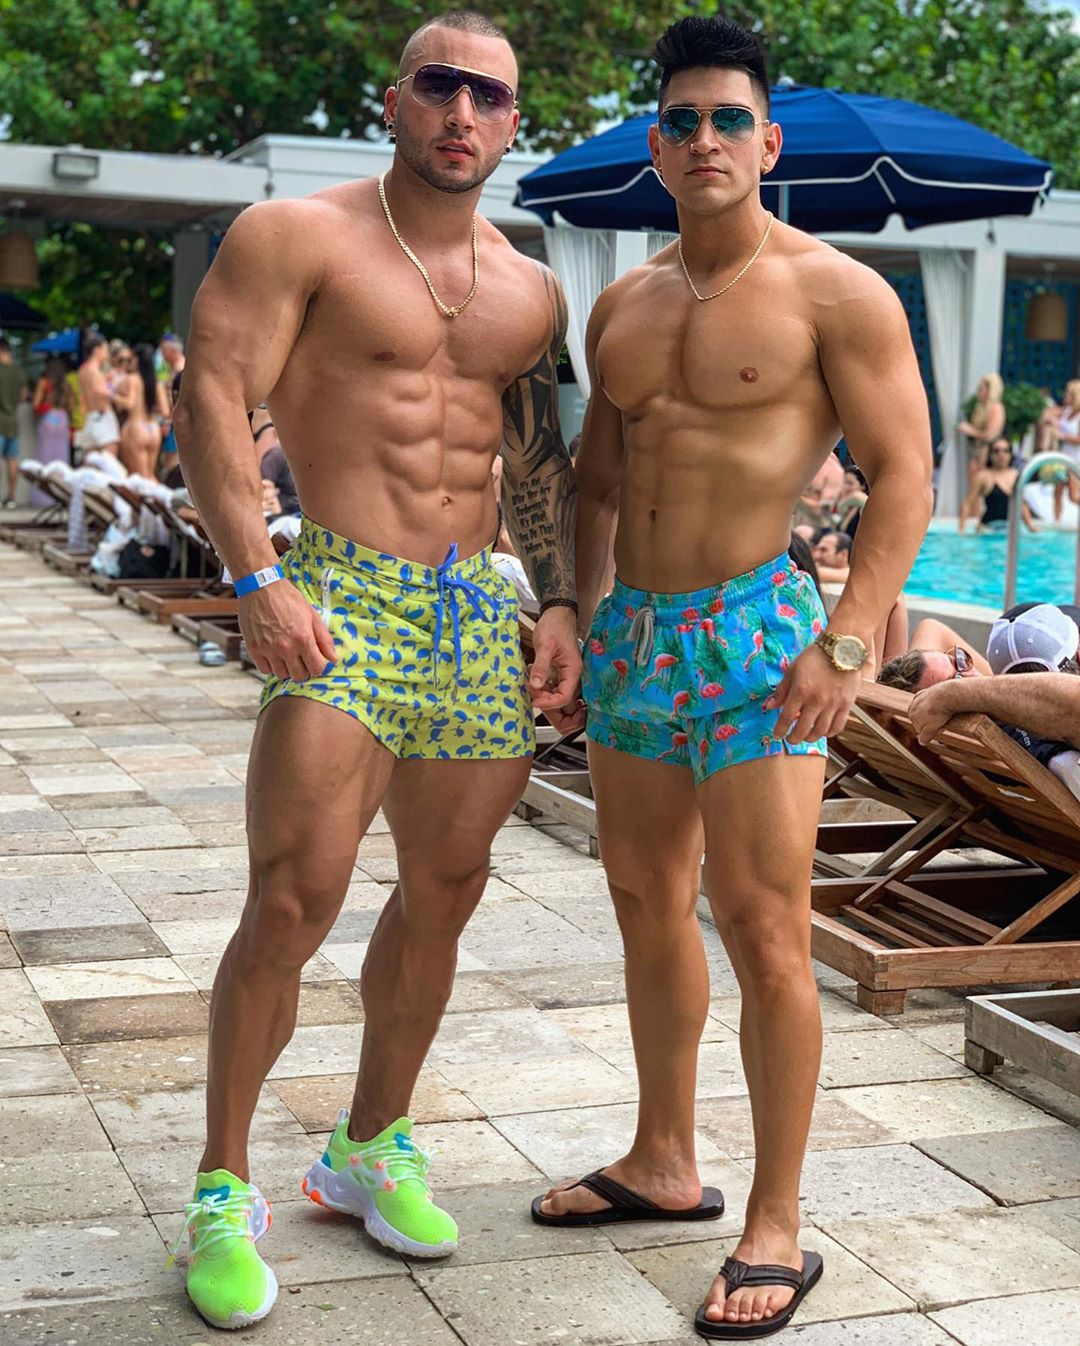 two-muscular-shirtless-hunks-pecs-abs-sunglasses-dudes-pool